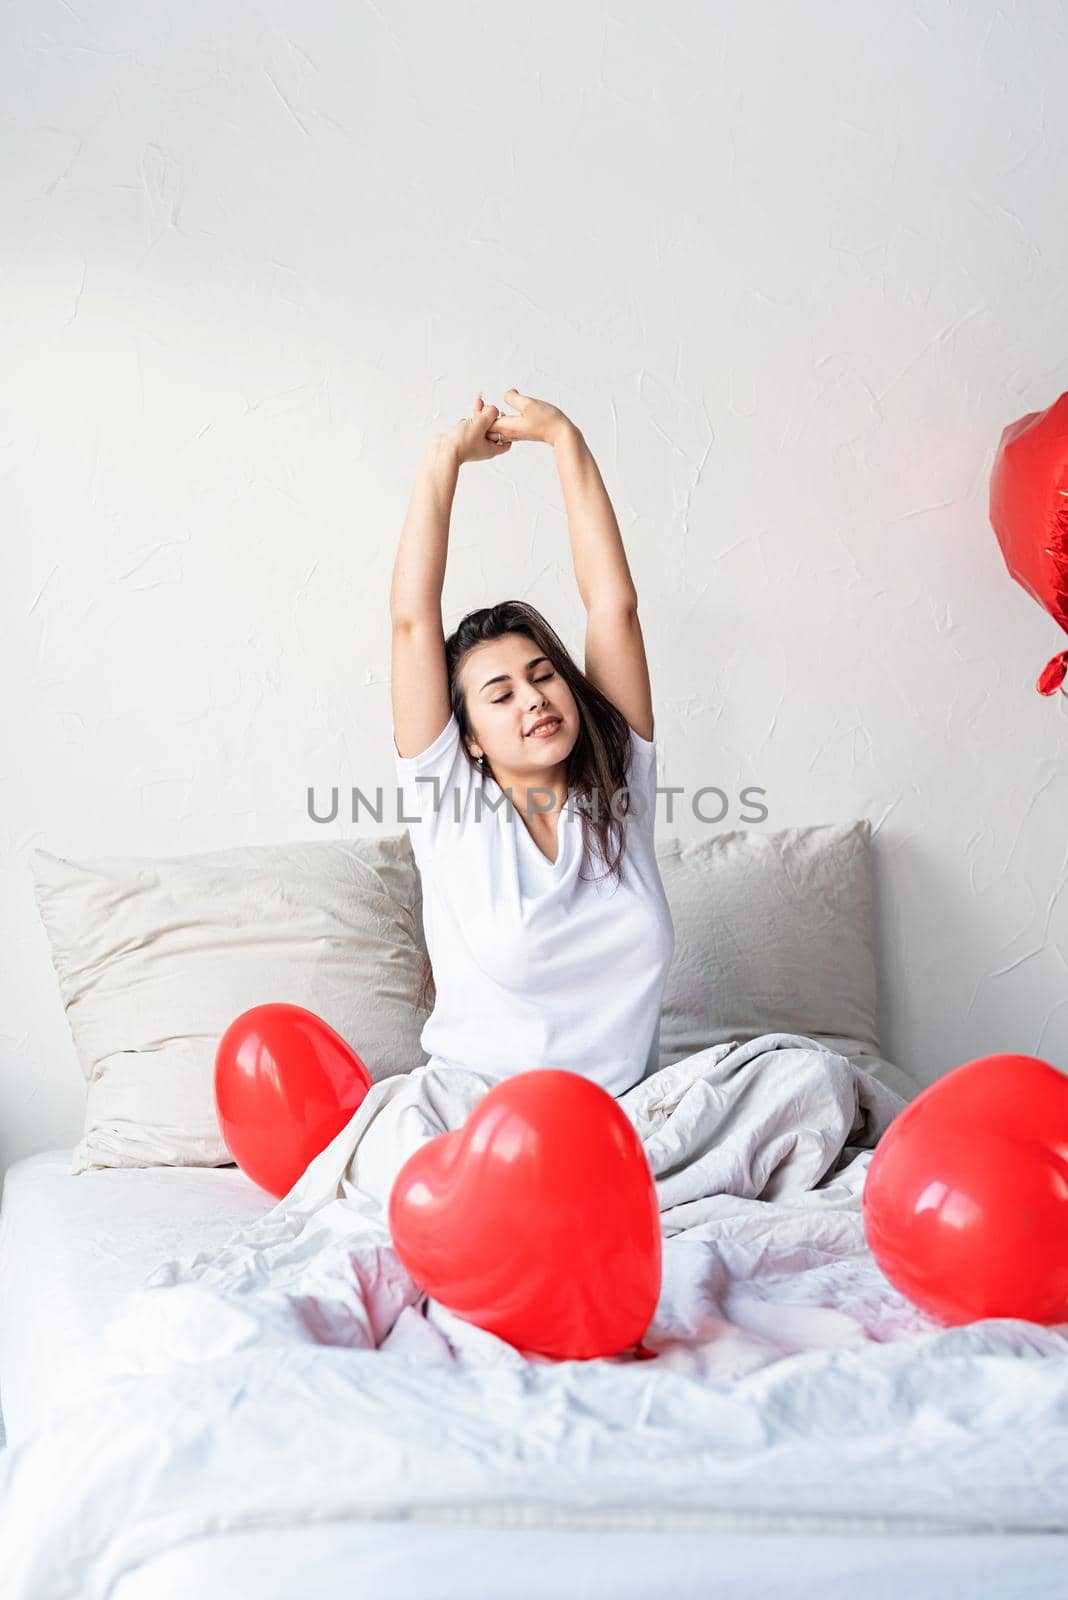 Valentine's Day. Sleeping. Young happy brunette woman sitting awake in the bed with red heart shaped balloons